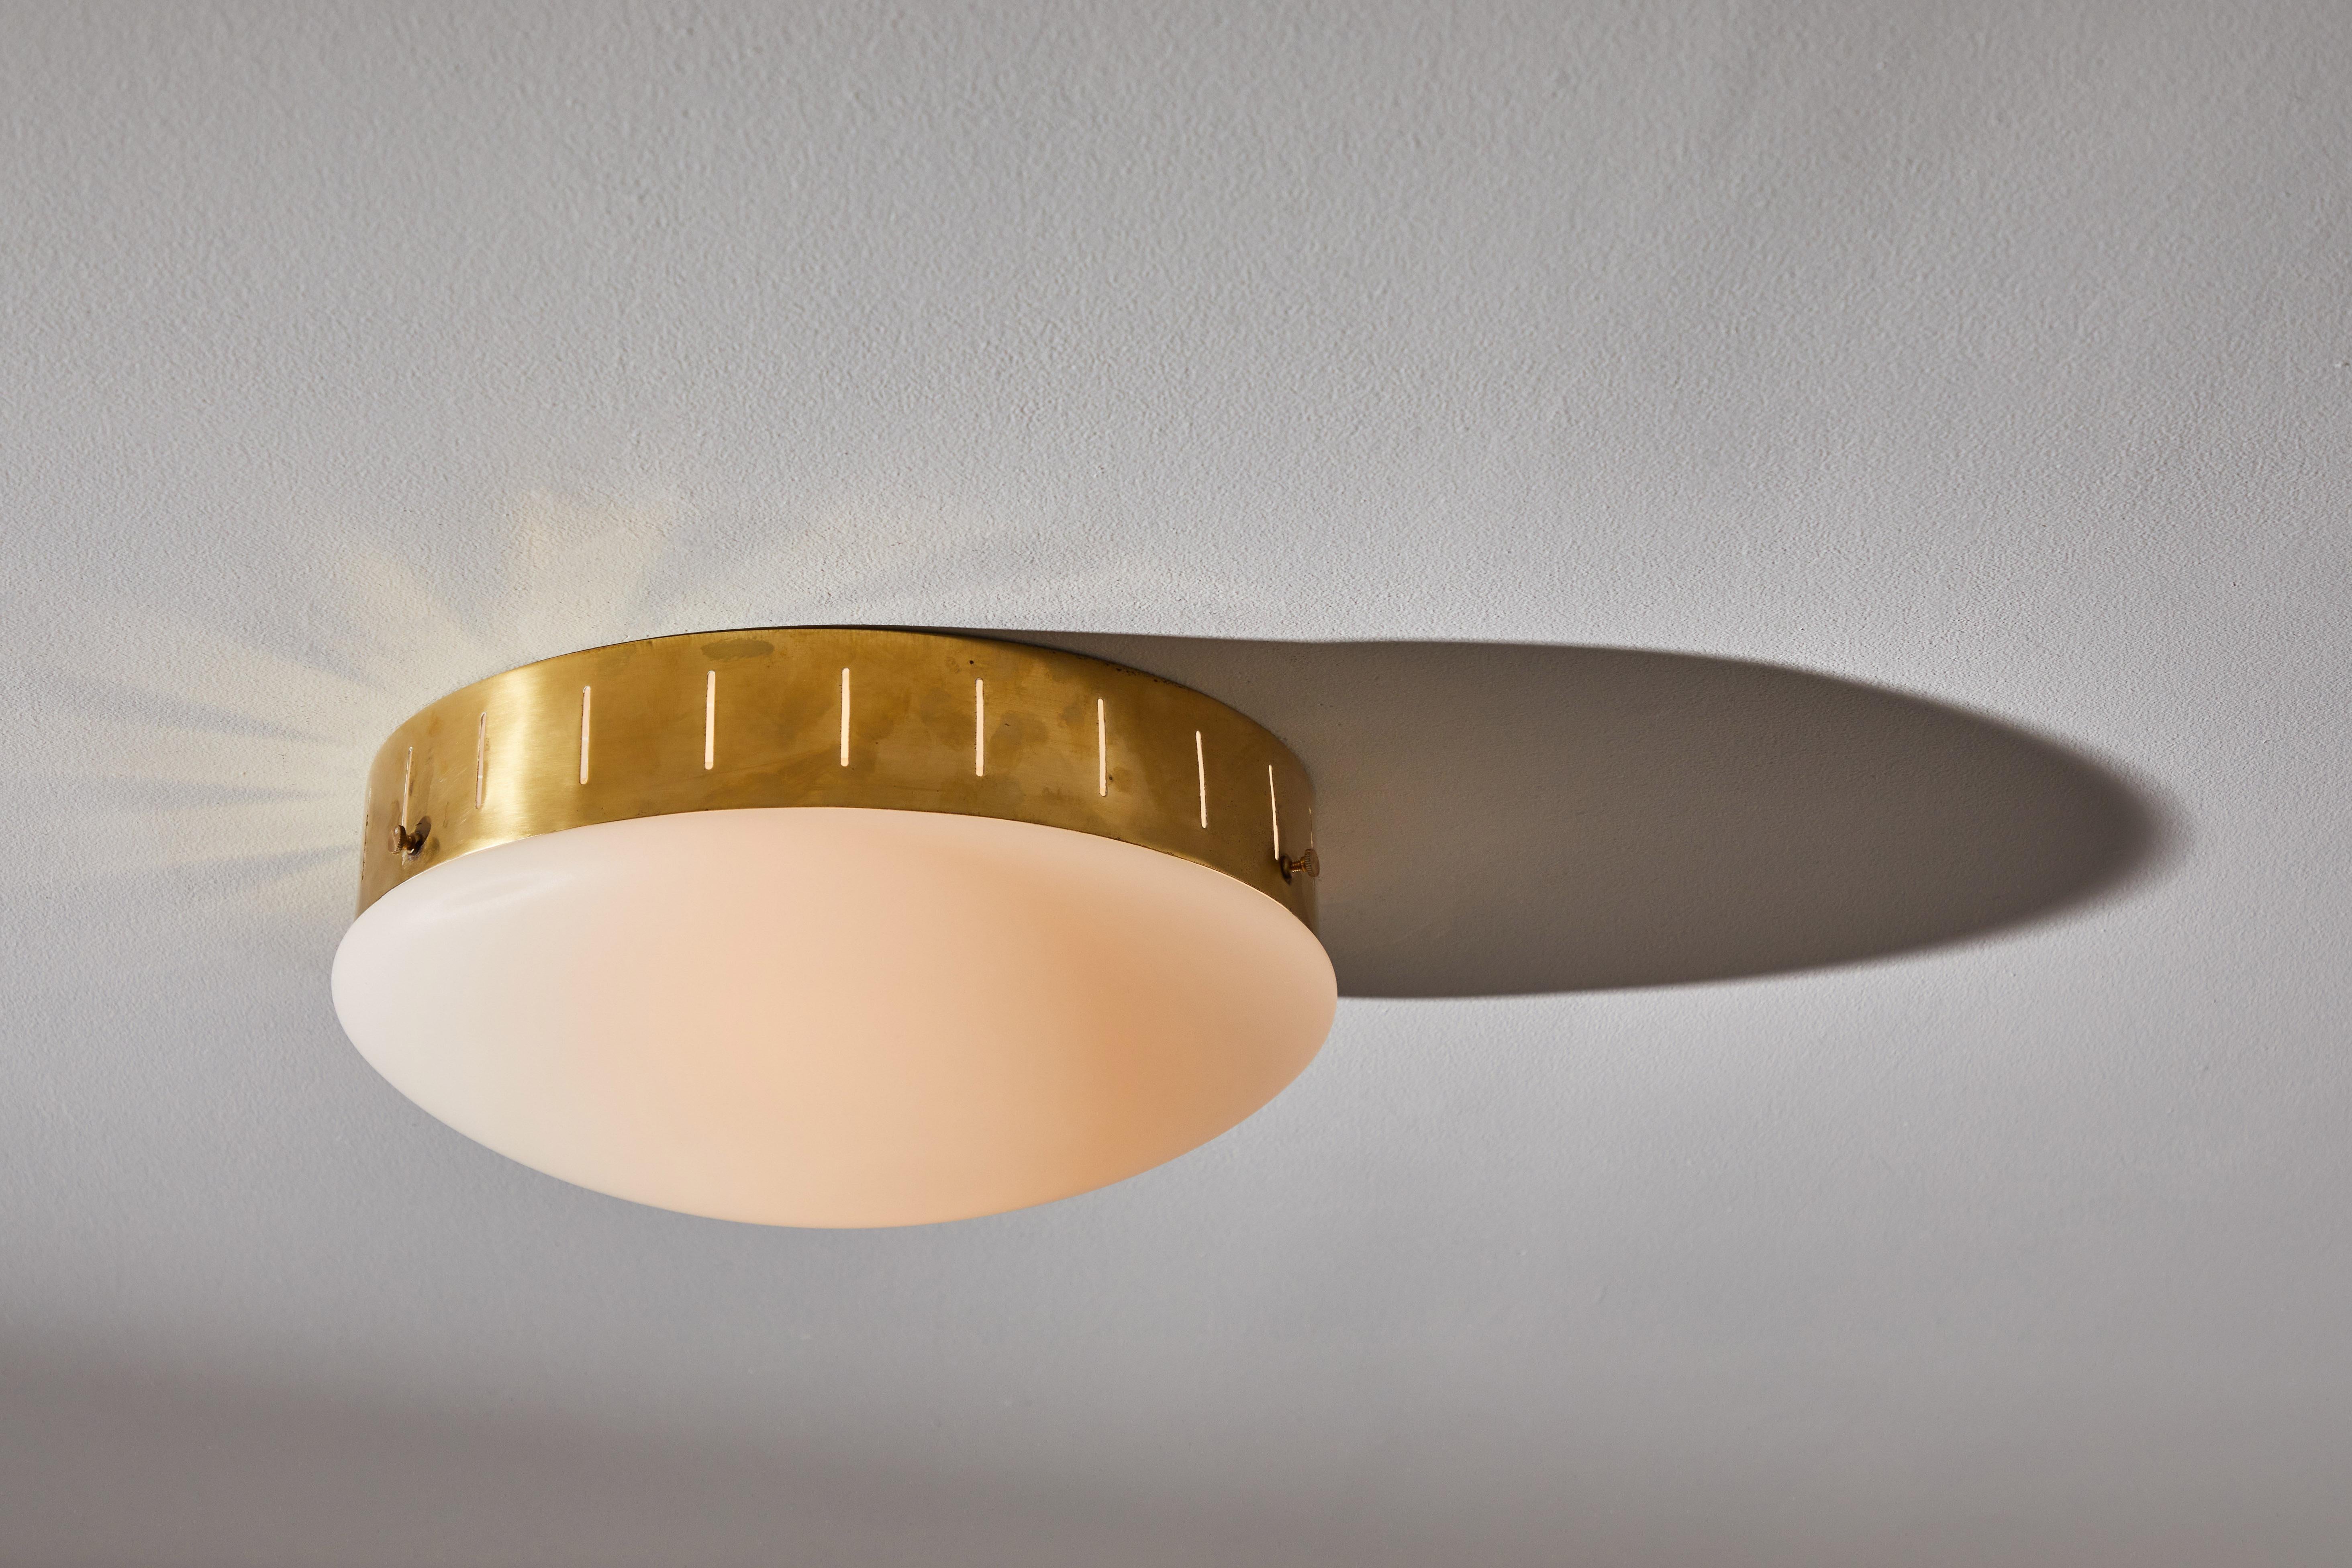 Single flushmount ceiling light by Stilux. Designed and manufactured in Italy, circa 1960s. Brass, brushed satin glass diffusers. Rewired for U.S. standards. Light takes one E27 100w maximum bulb. Bulbs provided as a one time courtesy. QTY: 1